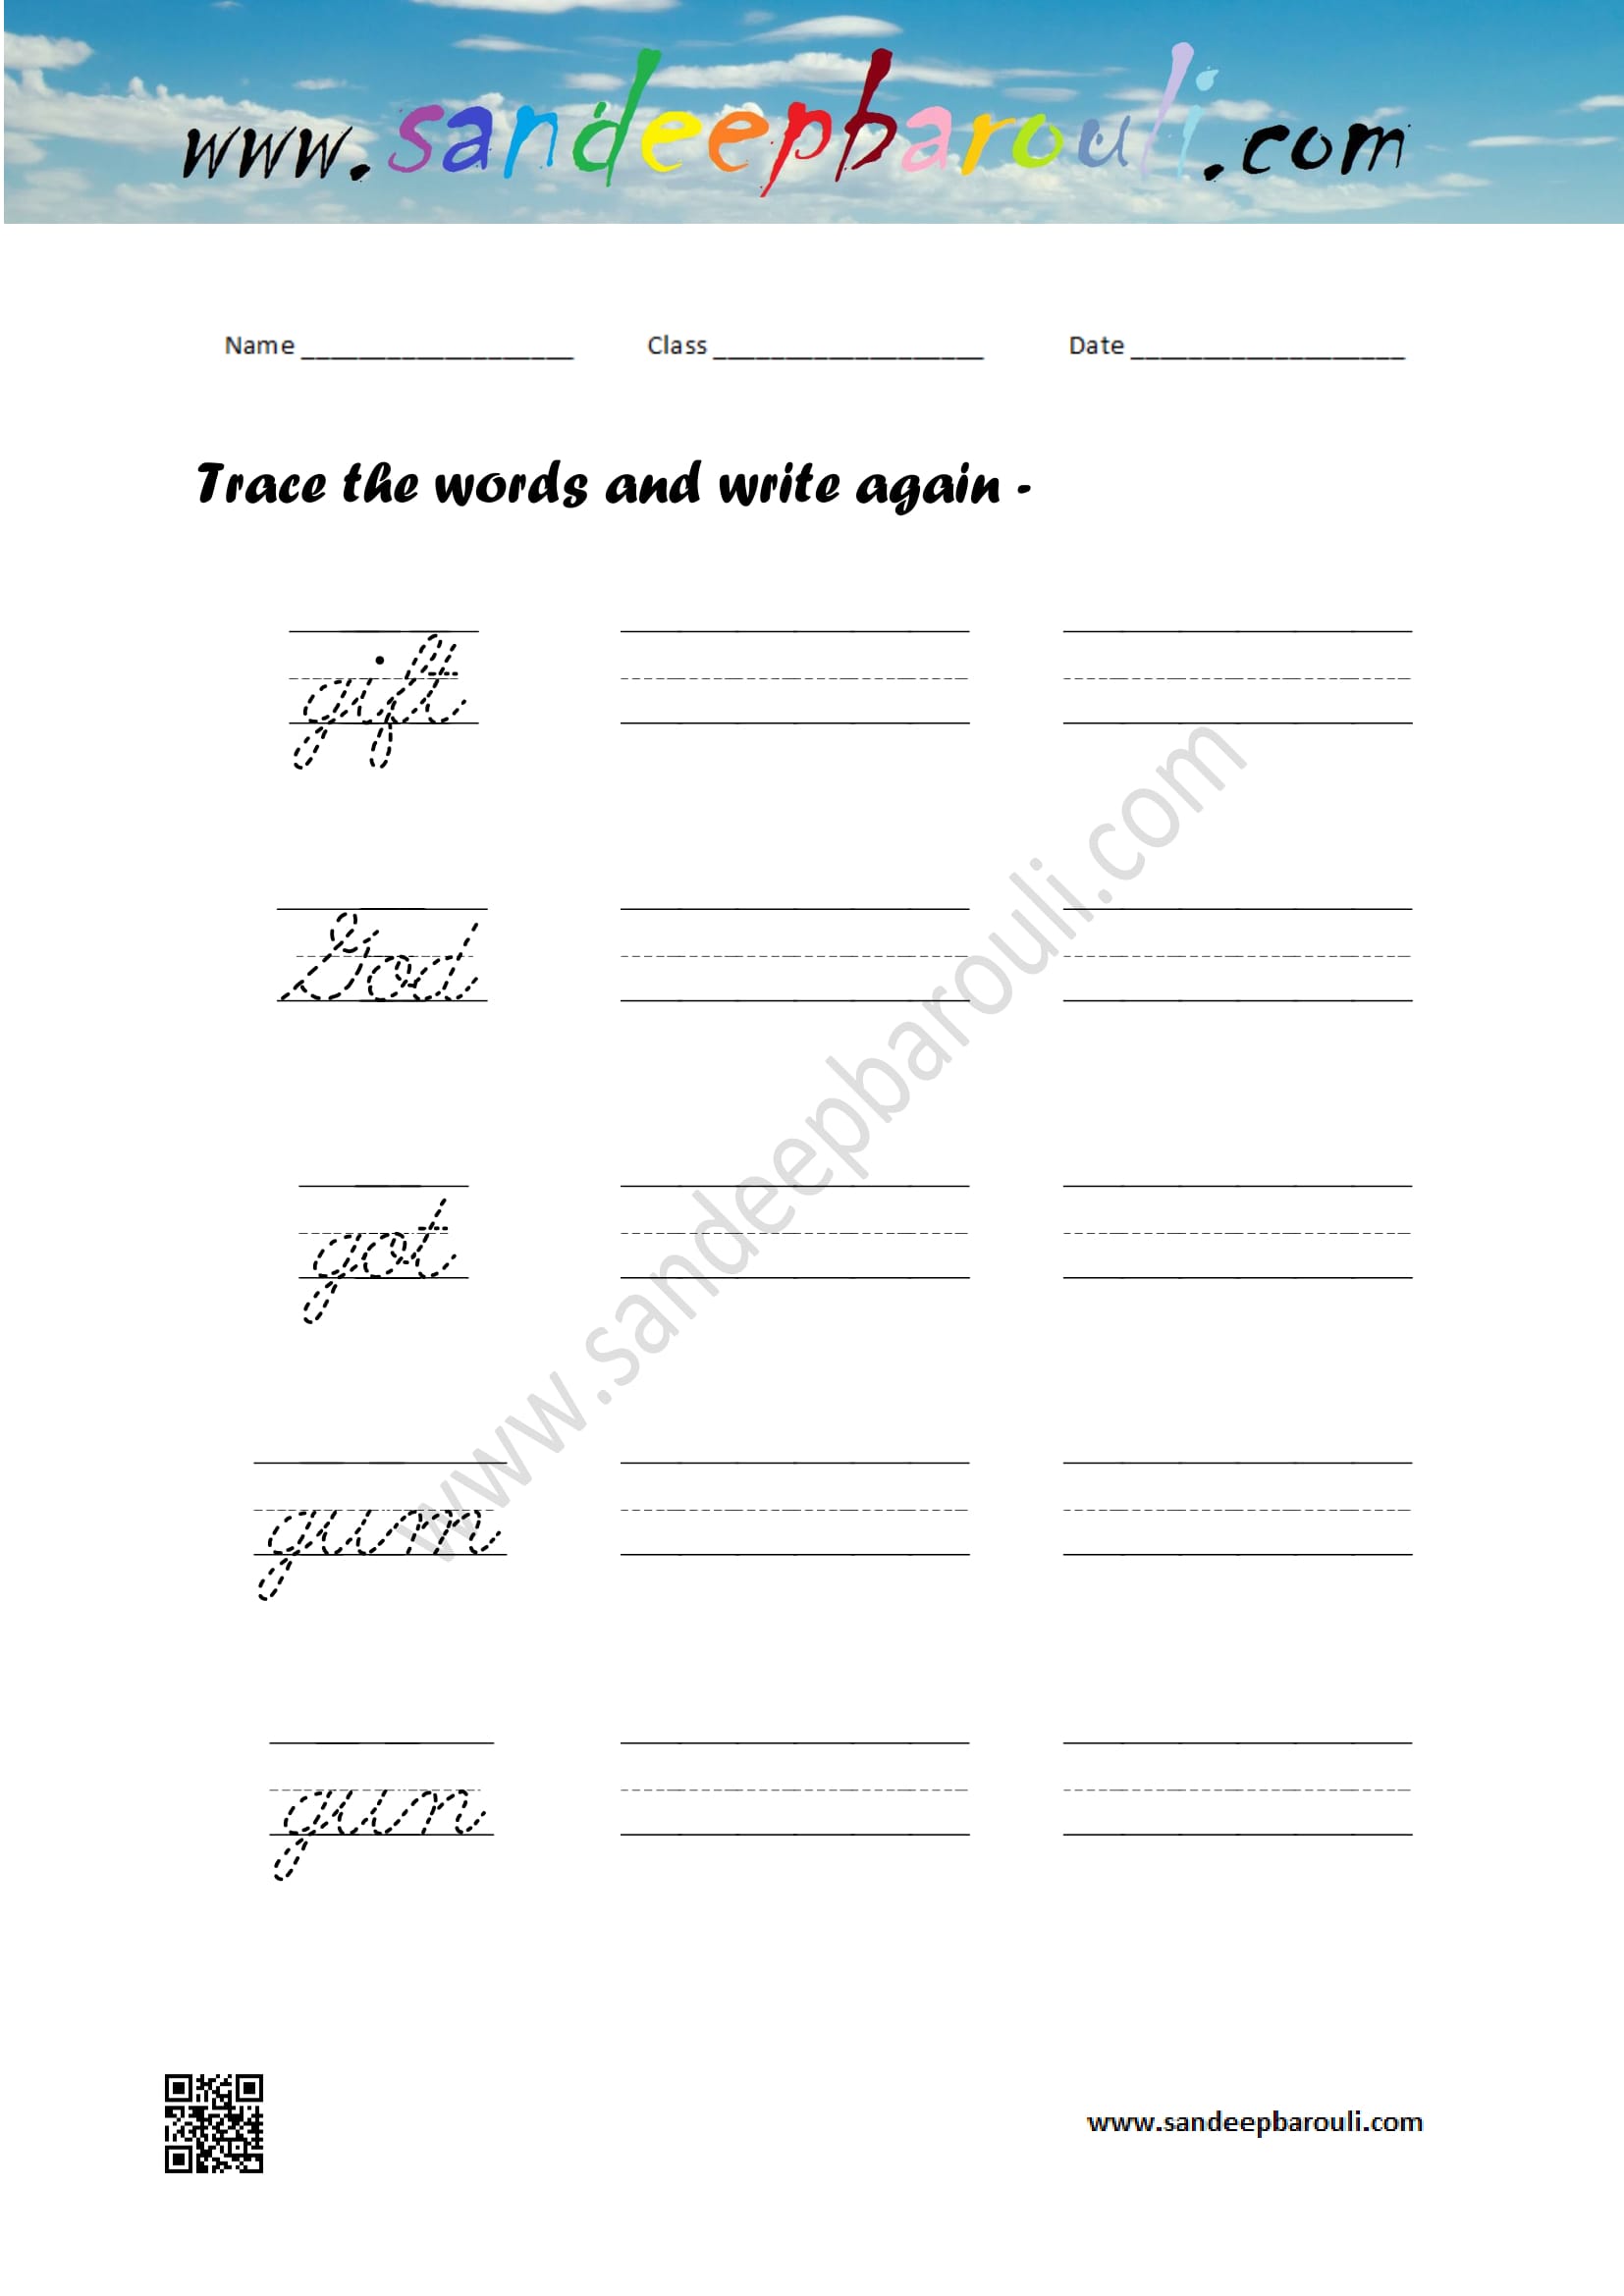 Cursive writing worksheet – trace the words and write again (10)